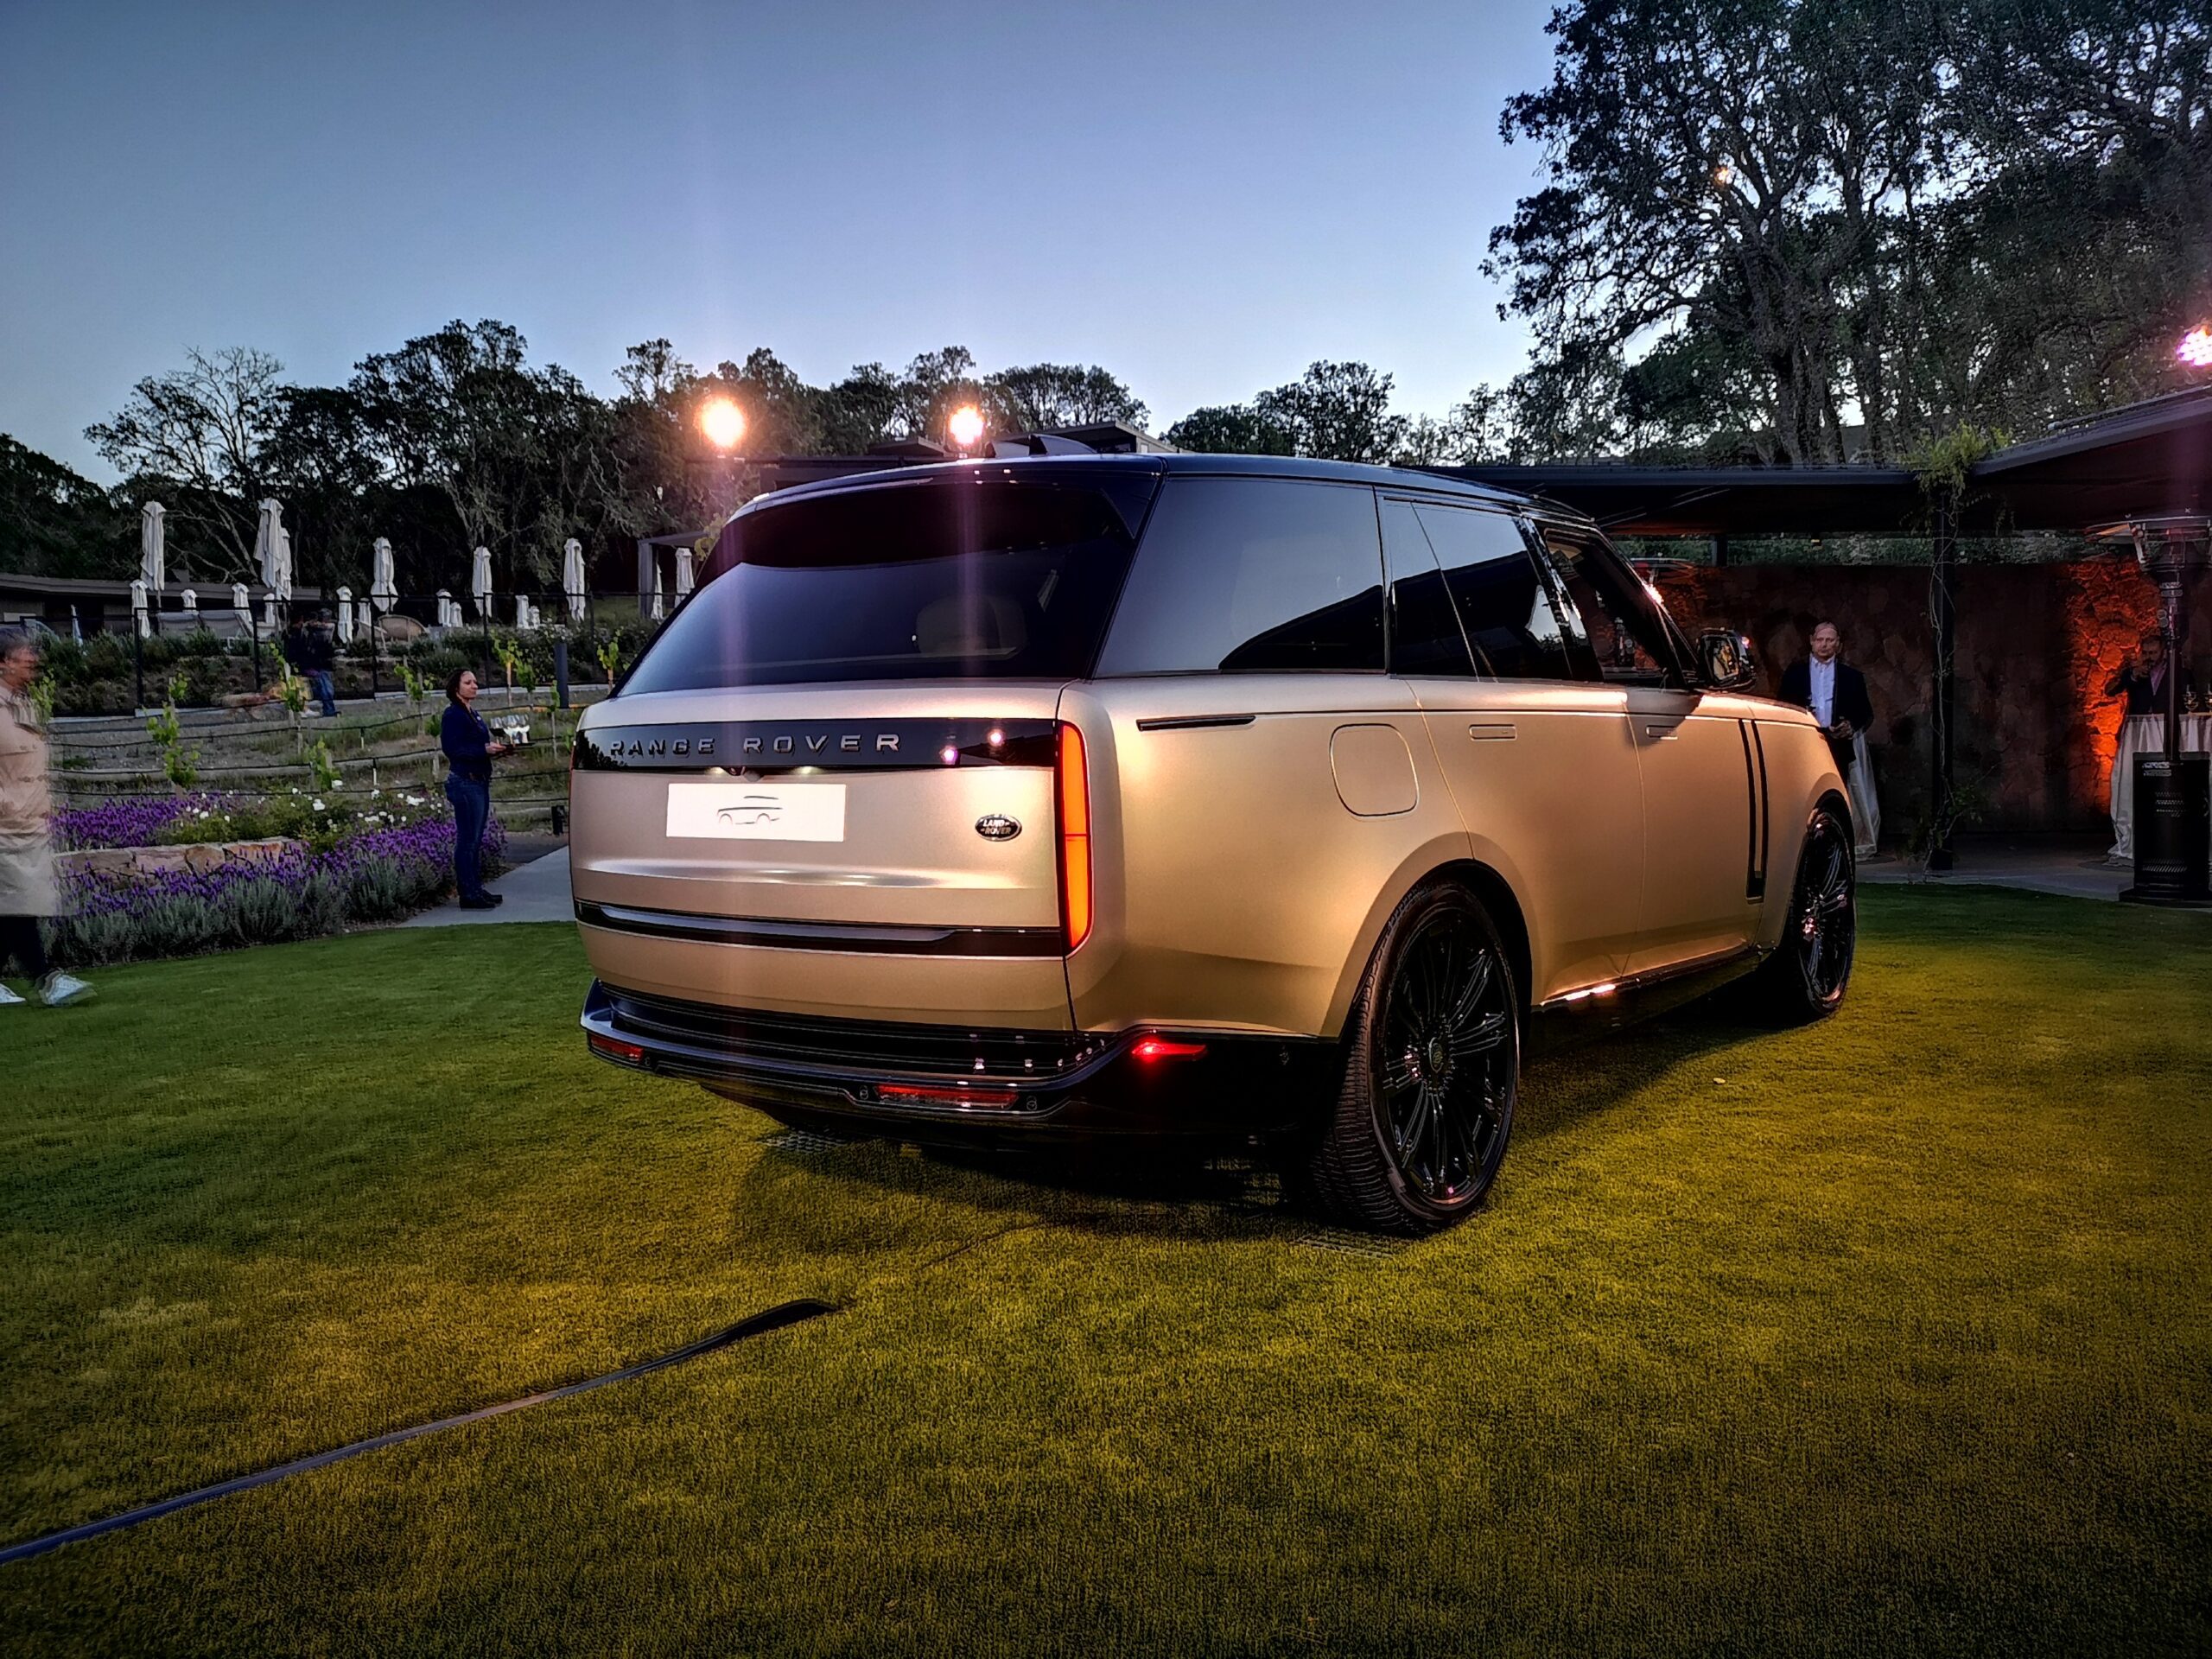 2022 Range Rover review NZ